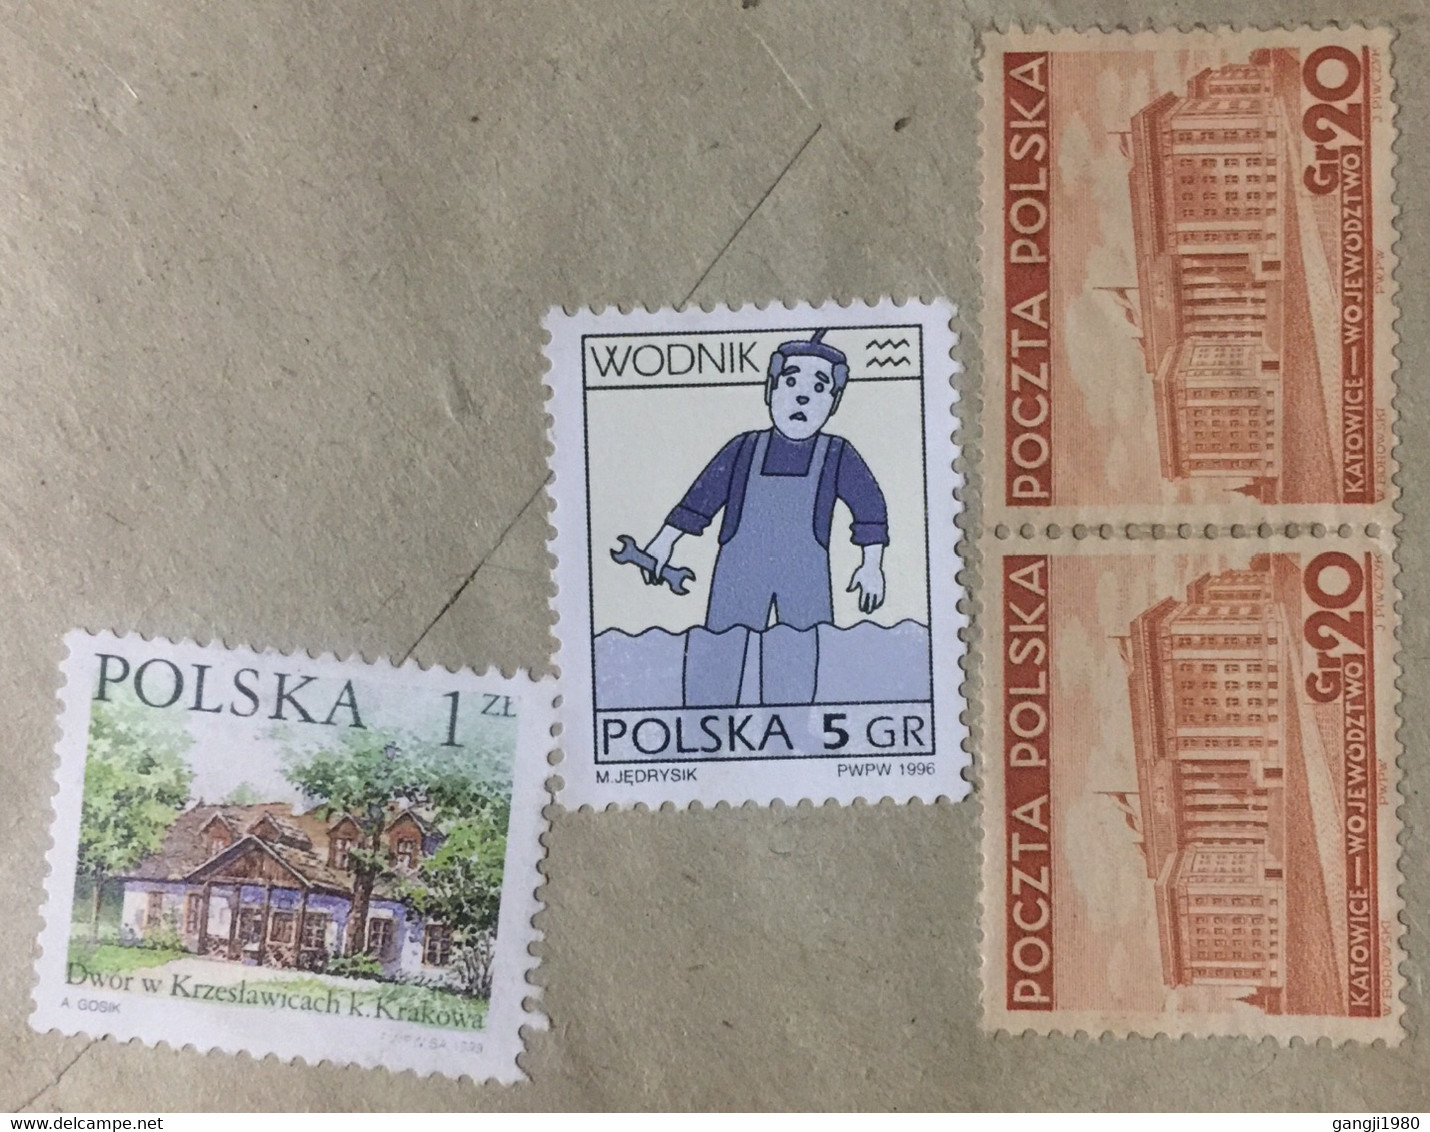 POLAND 2000, USED AIRMAIL COVER TO INDIA 4 DIFFERENT 1958 PICTURAL SPECIAL CANCELLATION, KATOWIDE ,HOUSE MUSIC,BUILDIN, - Cartas & Documentos